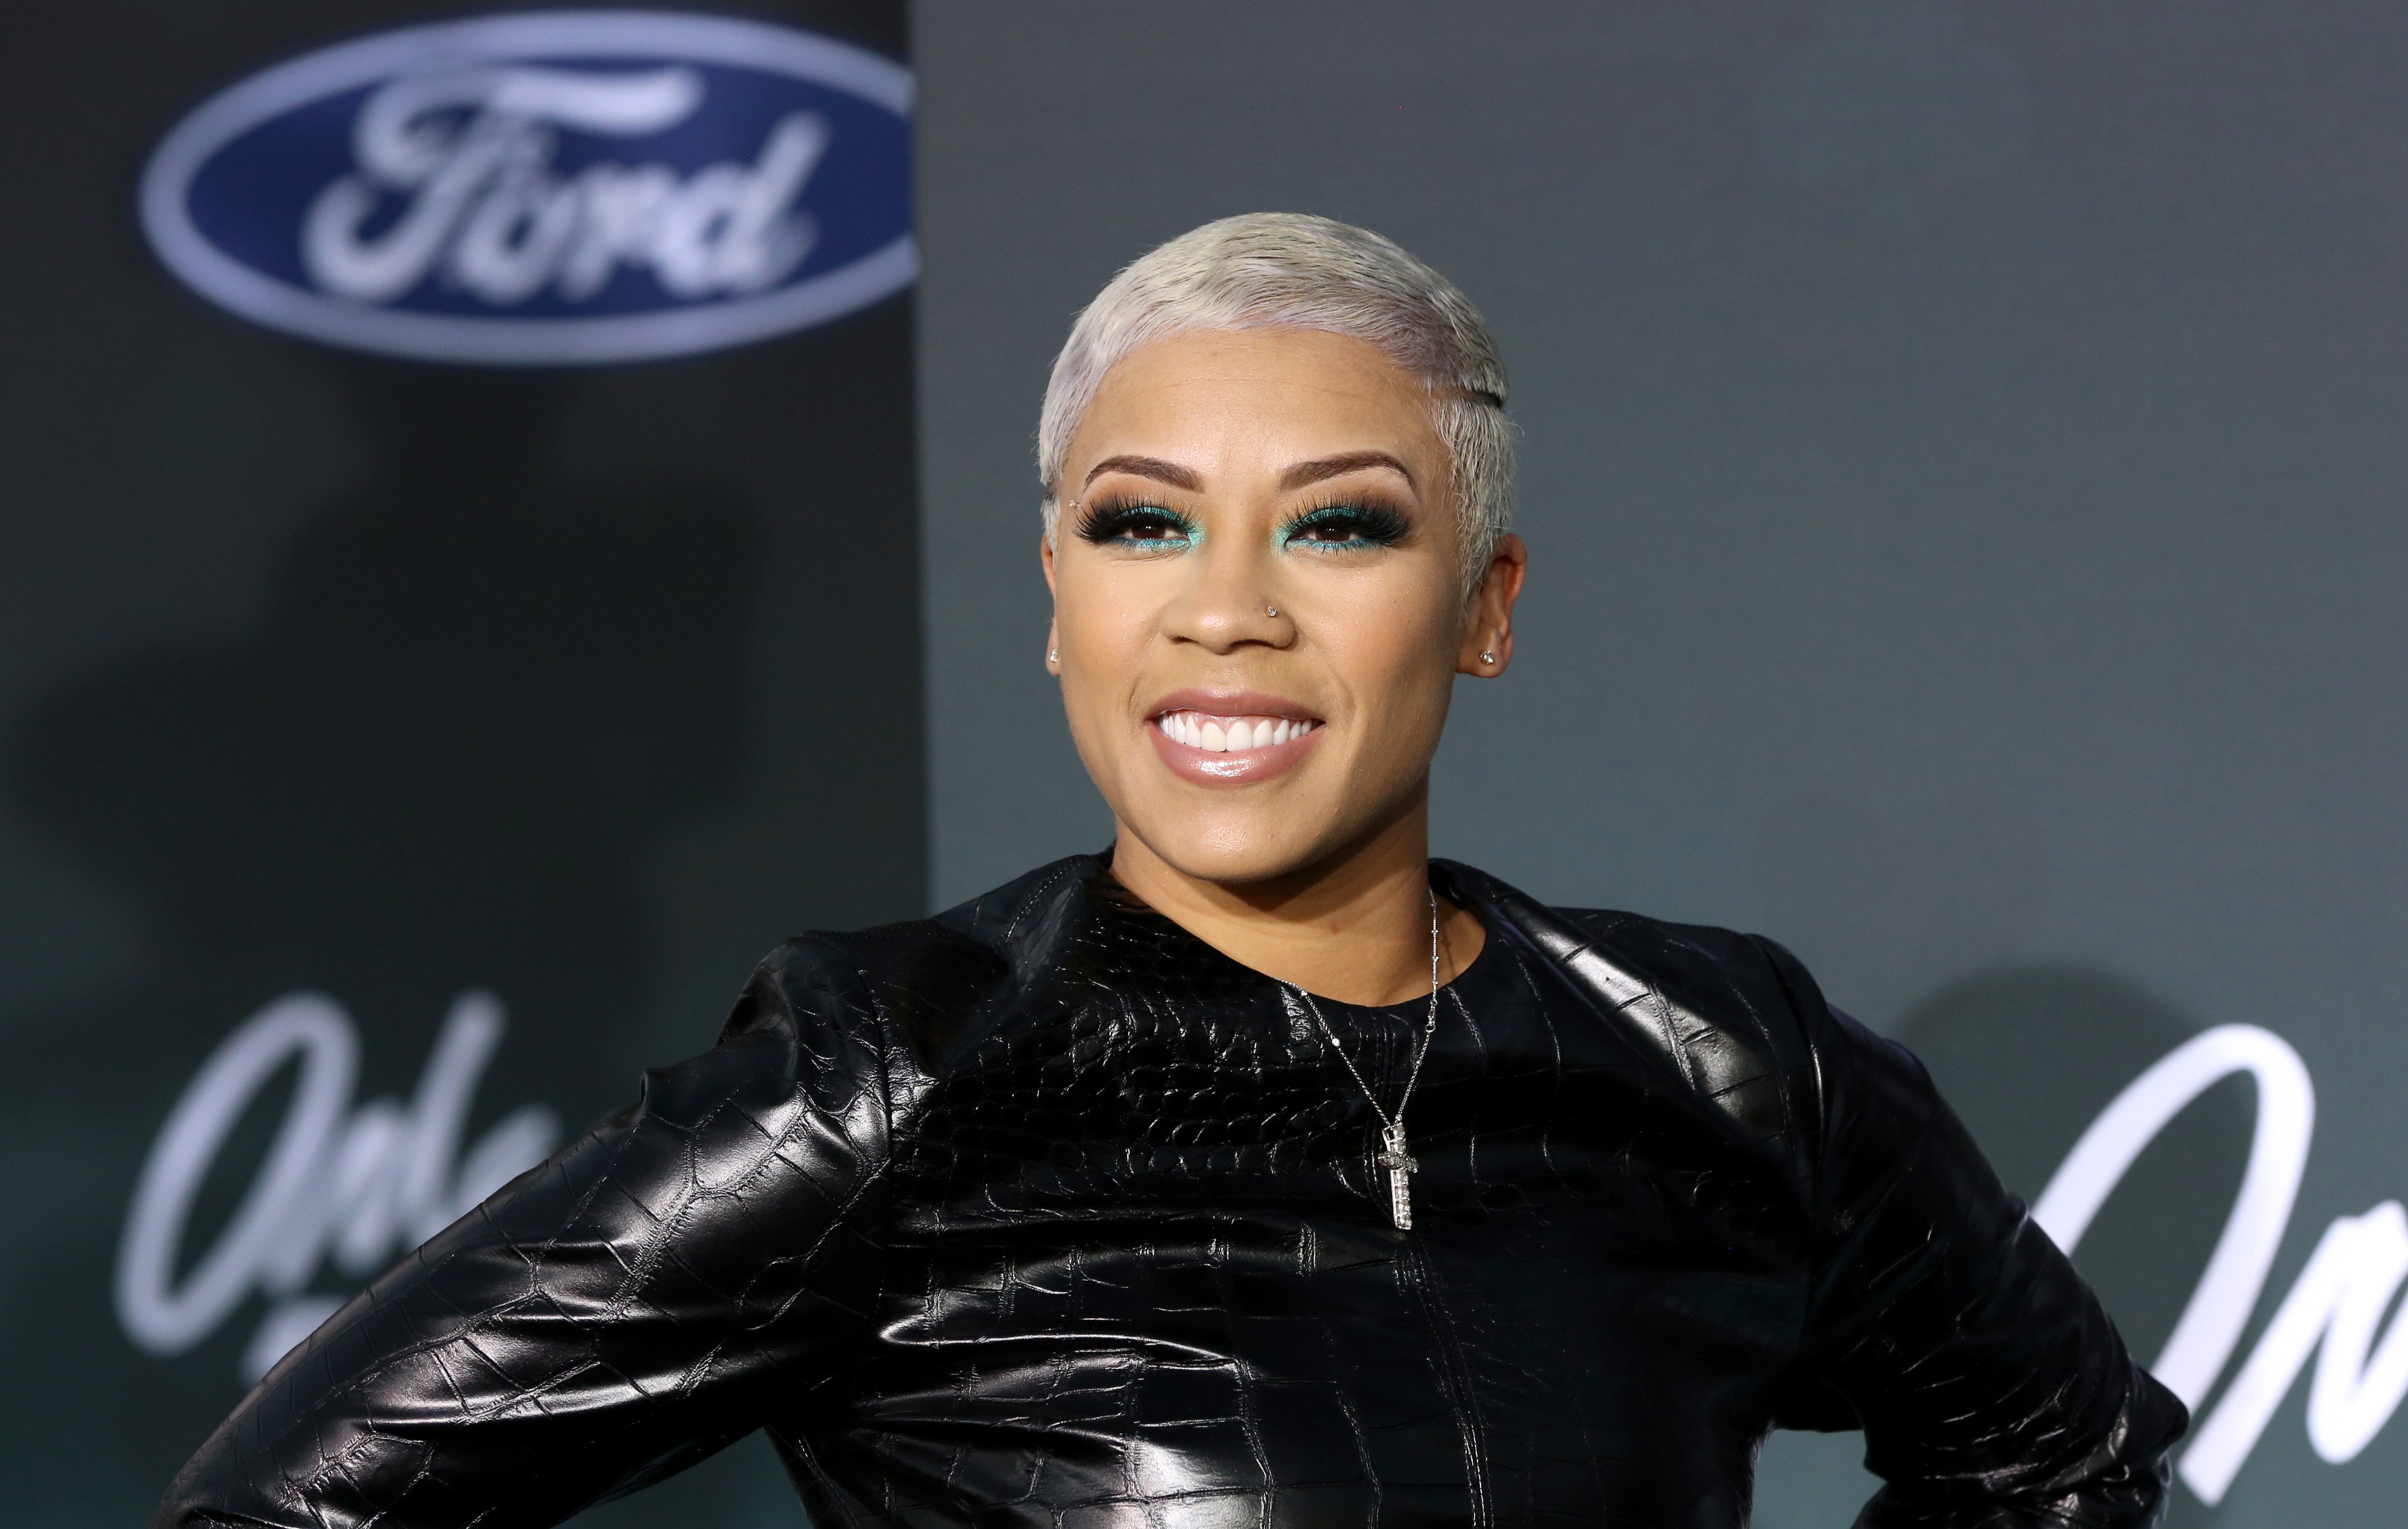  Keyshia Cole at the 2019 Soul Train Awards at the Orleans Arena on November 17, 2019 in Las Vegas, Nevada. | Source: Getty Images